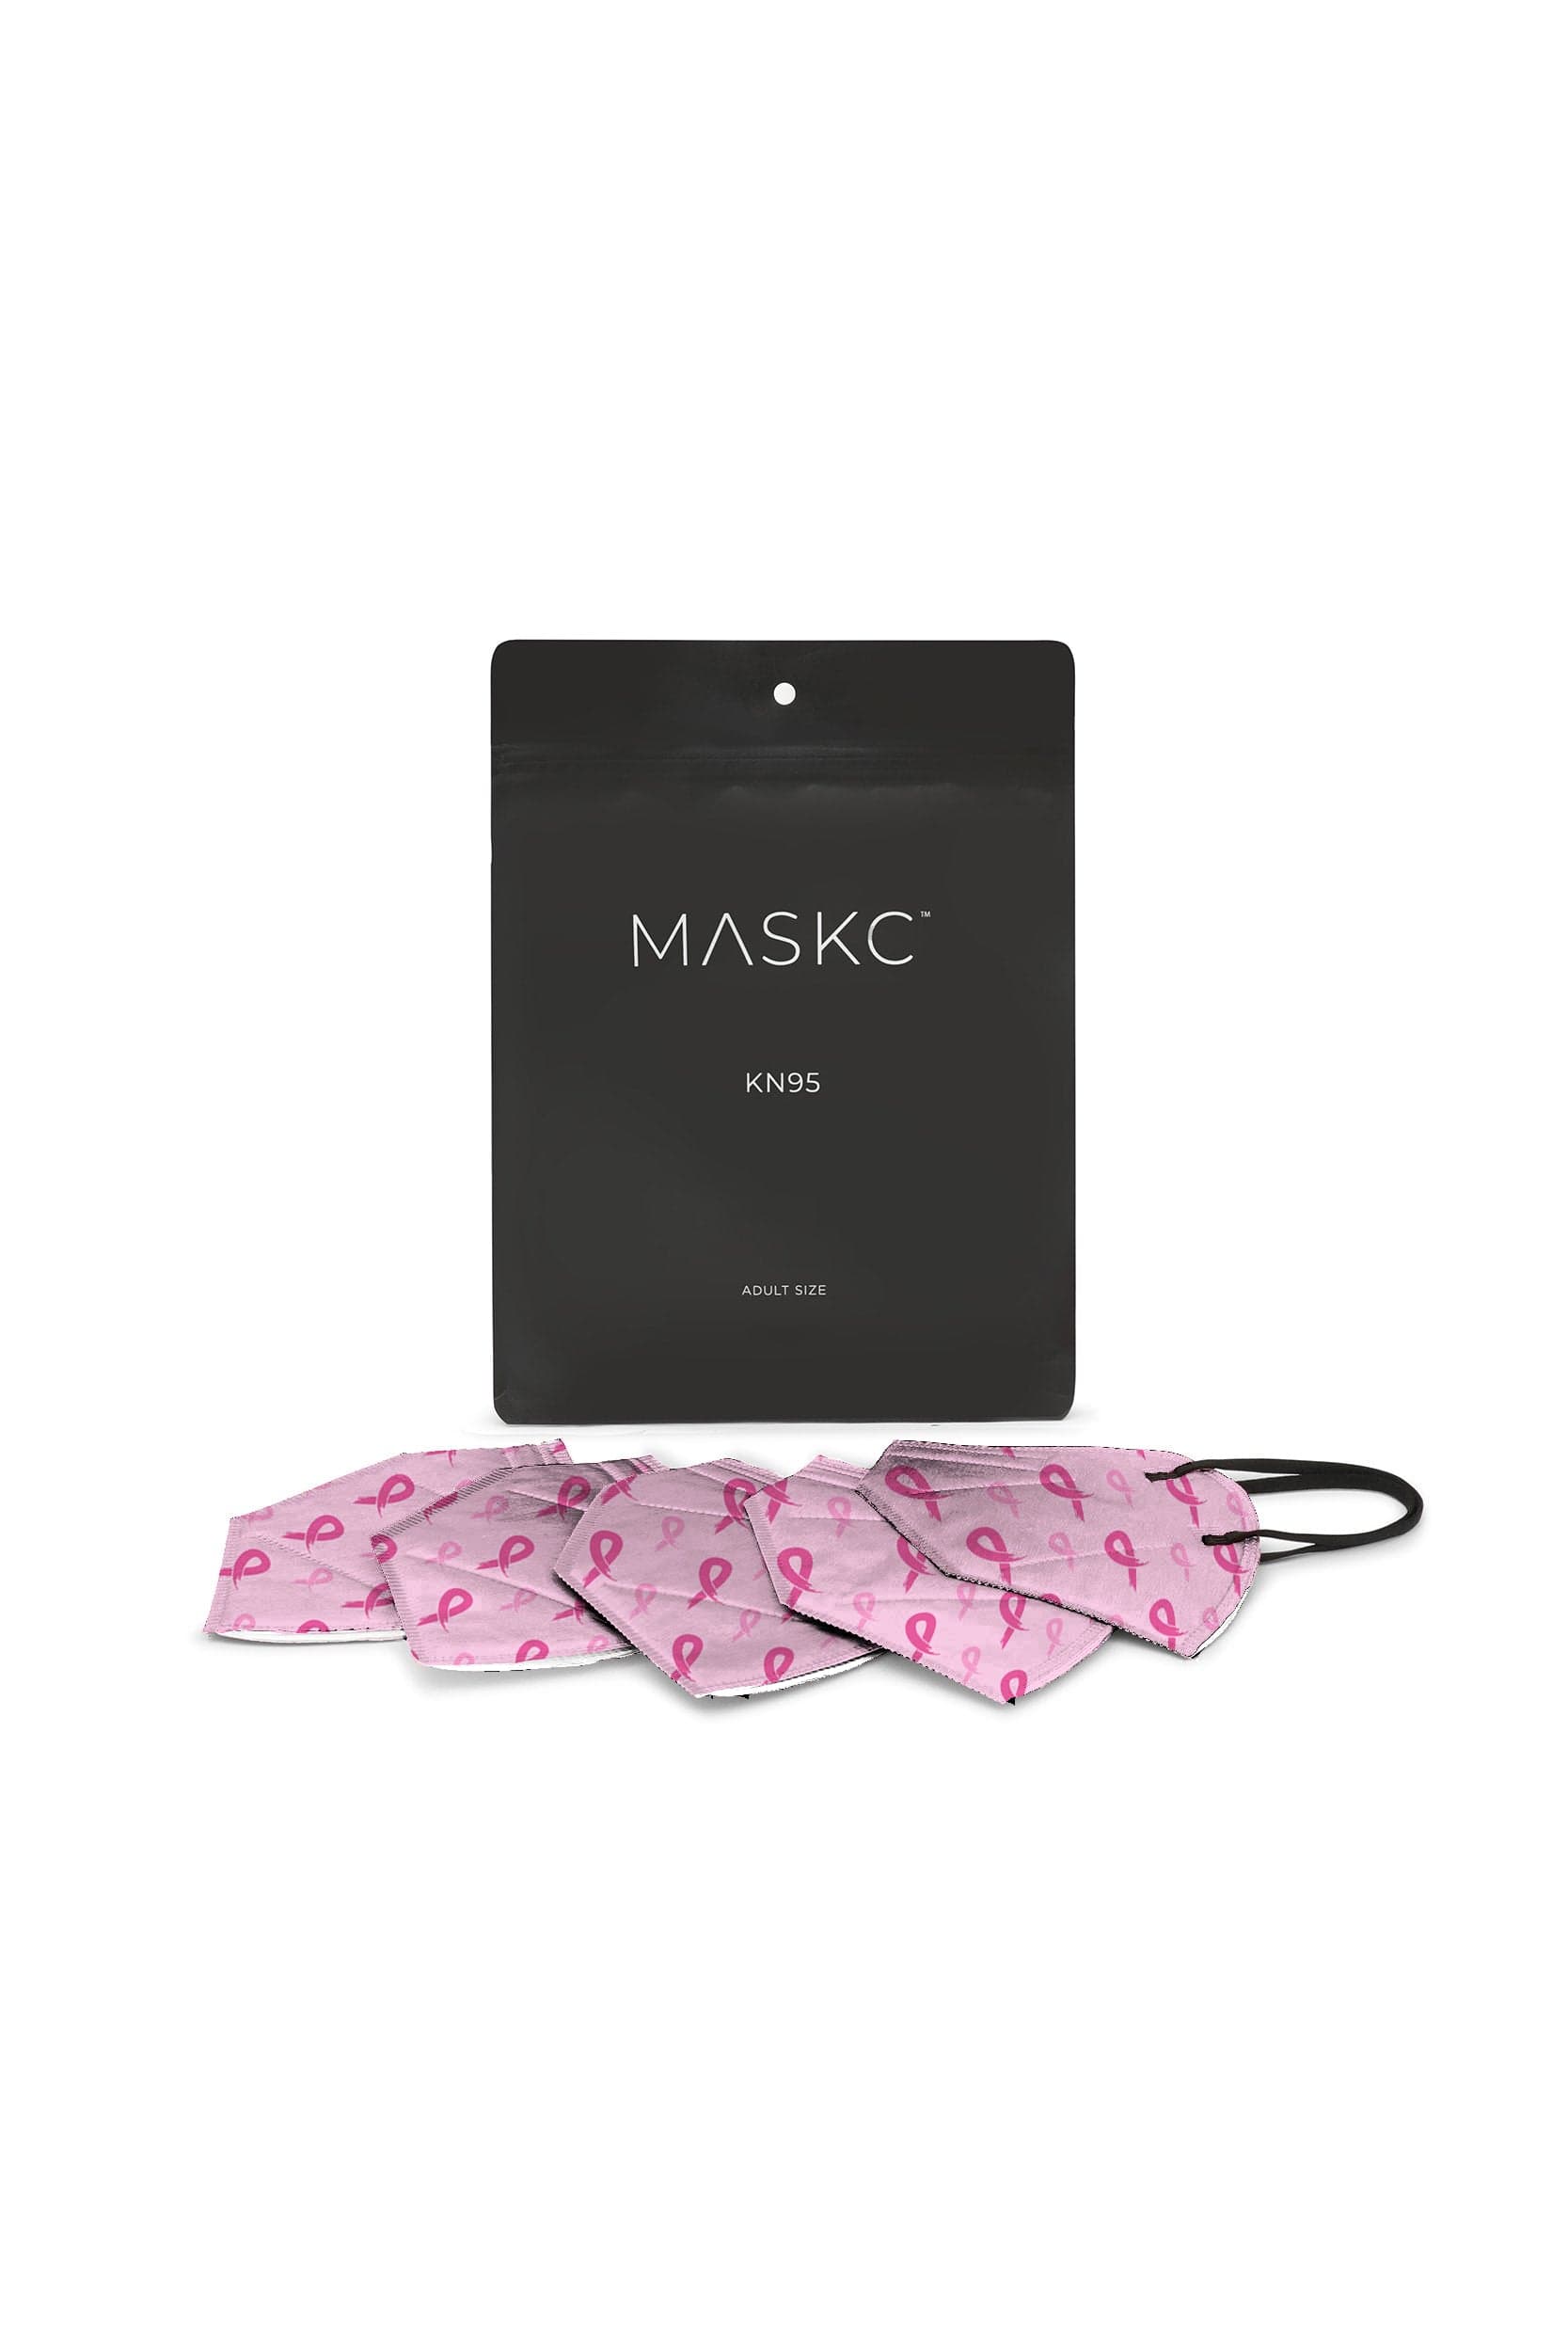 Pack of Breast Cancer Awareness Ribbon Print KN95 face masks. Each pack contains stylish high quality face masks.  